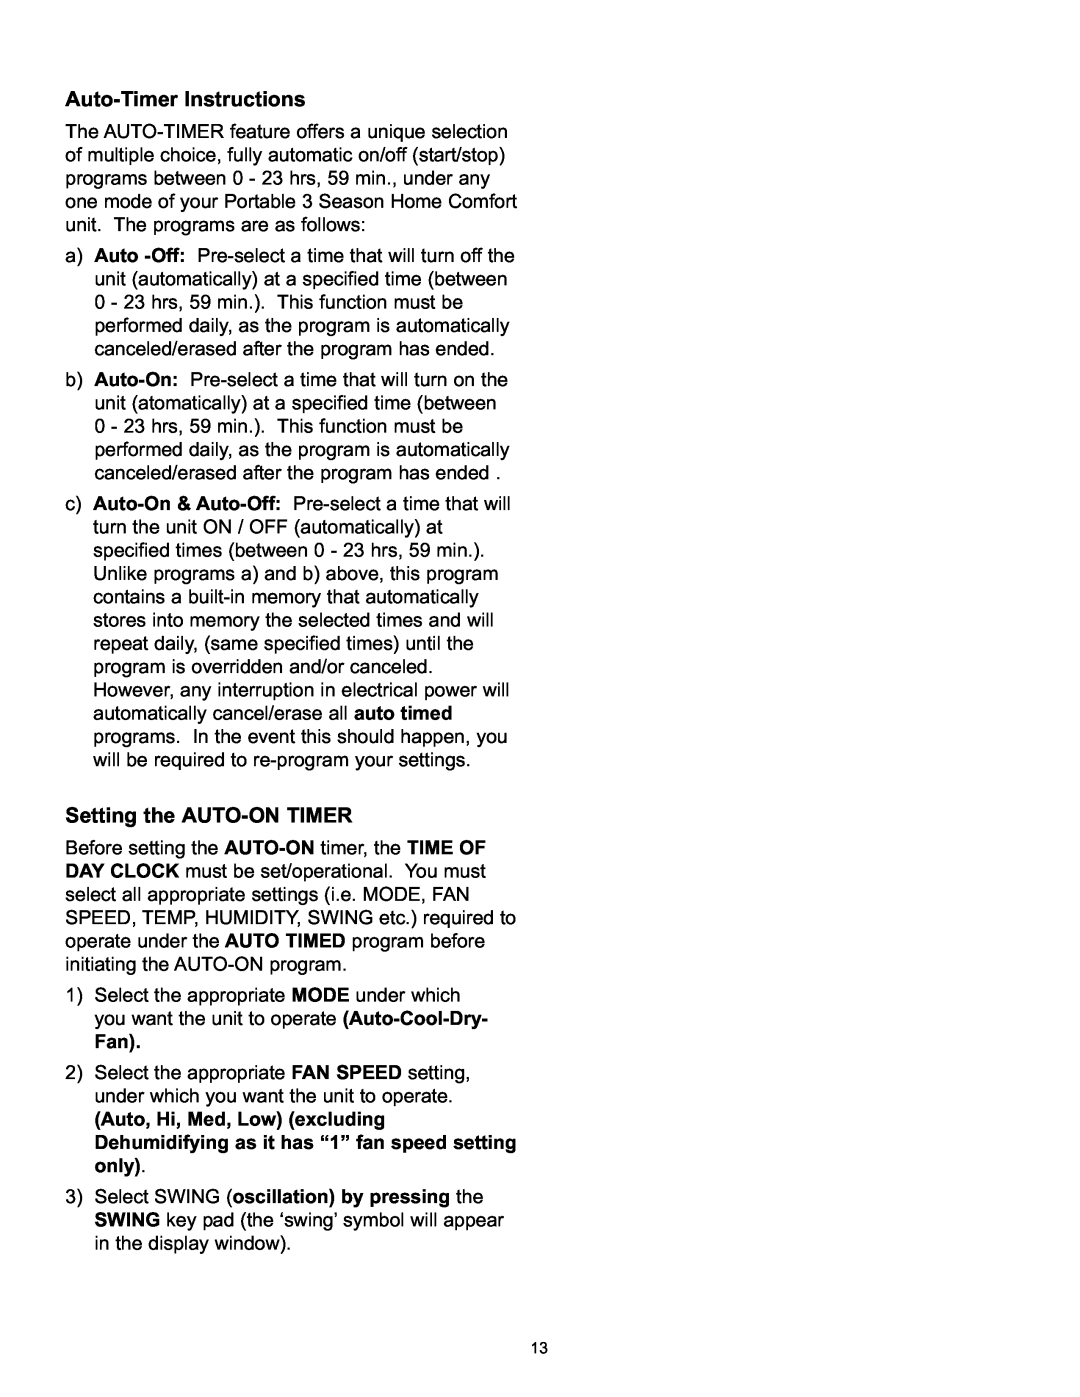 Danby DPAC120061 owner manual Auto-TimerInstructions, Setting the AUTO-ONTIMER 